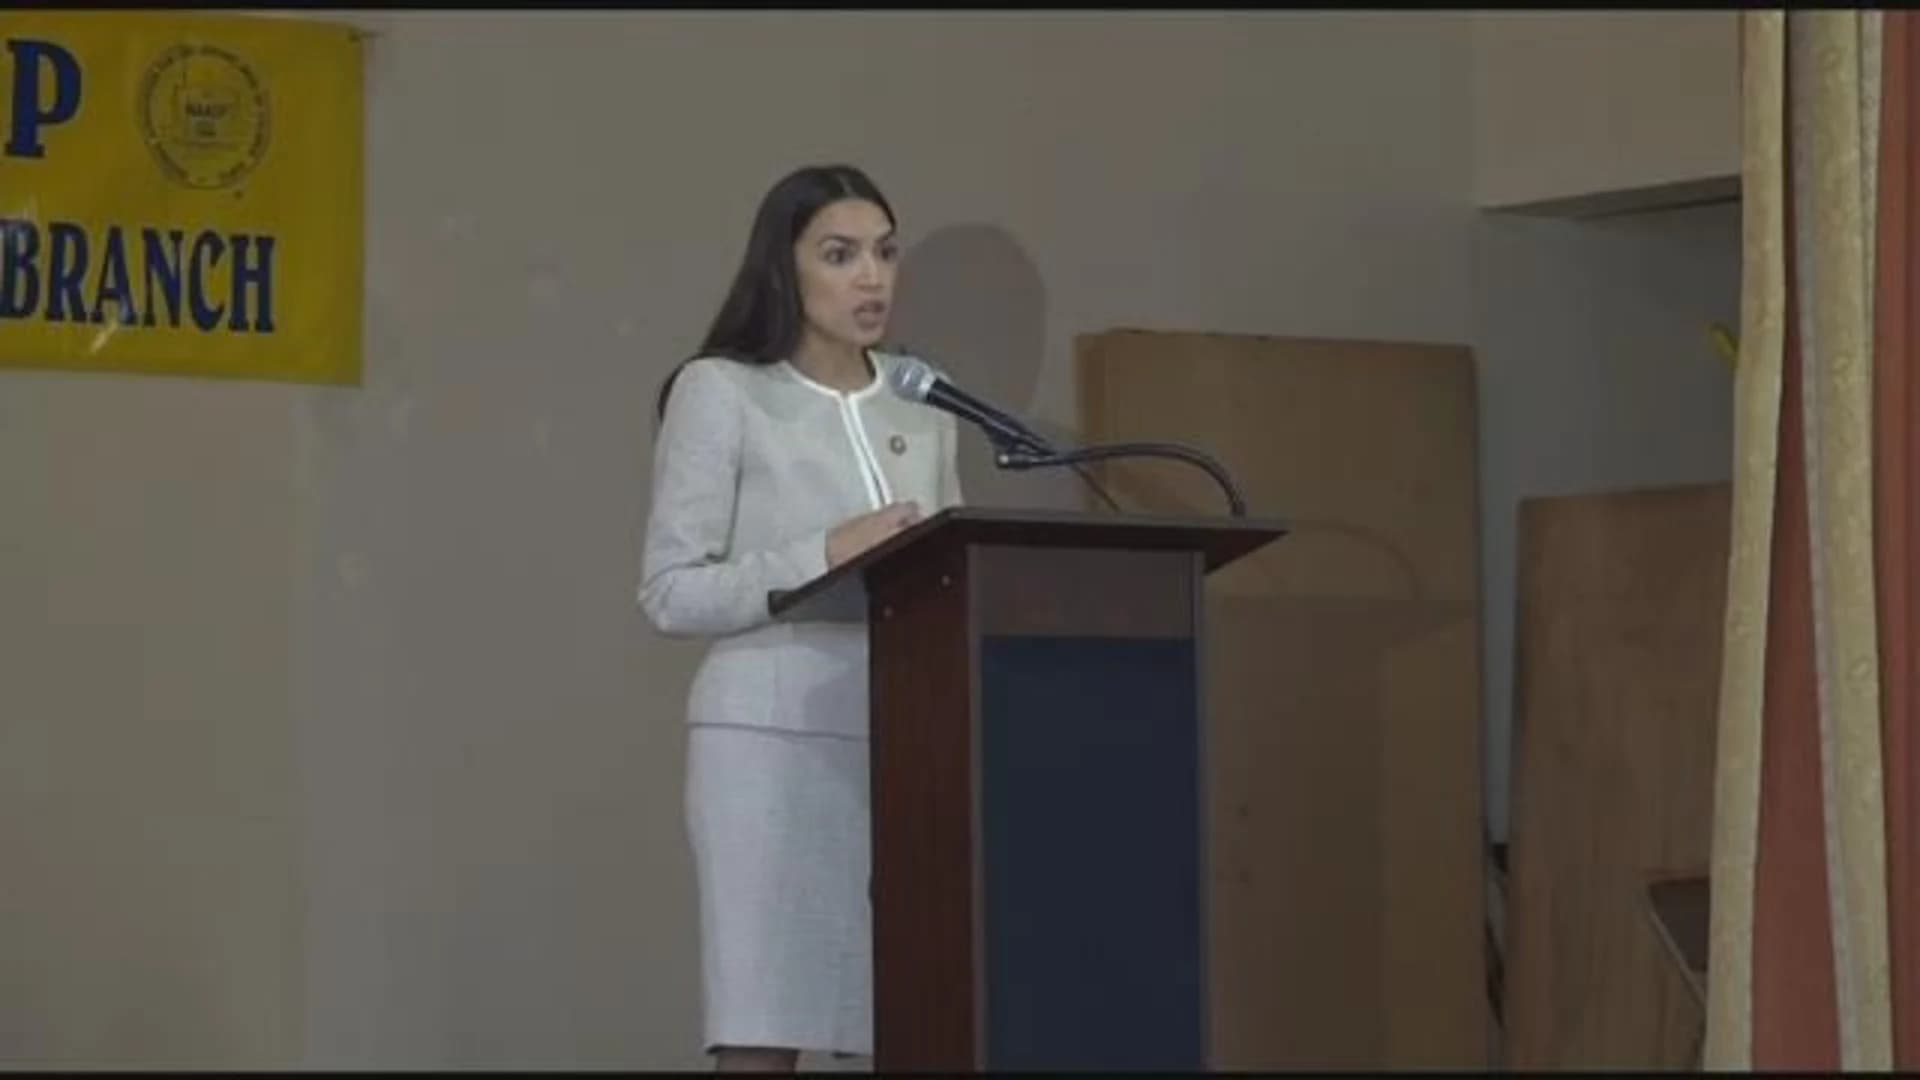 Rep. Ocasio-Cortez speaks at NAACP's Women's History Month event